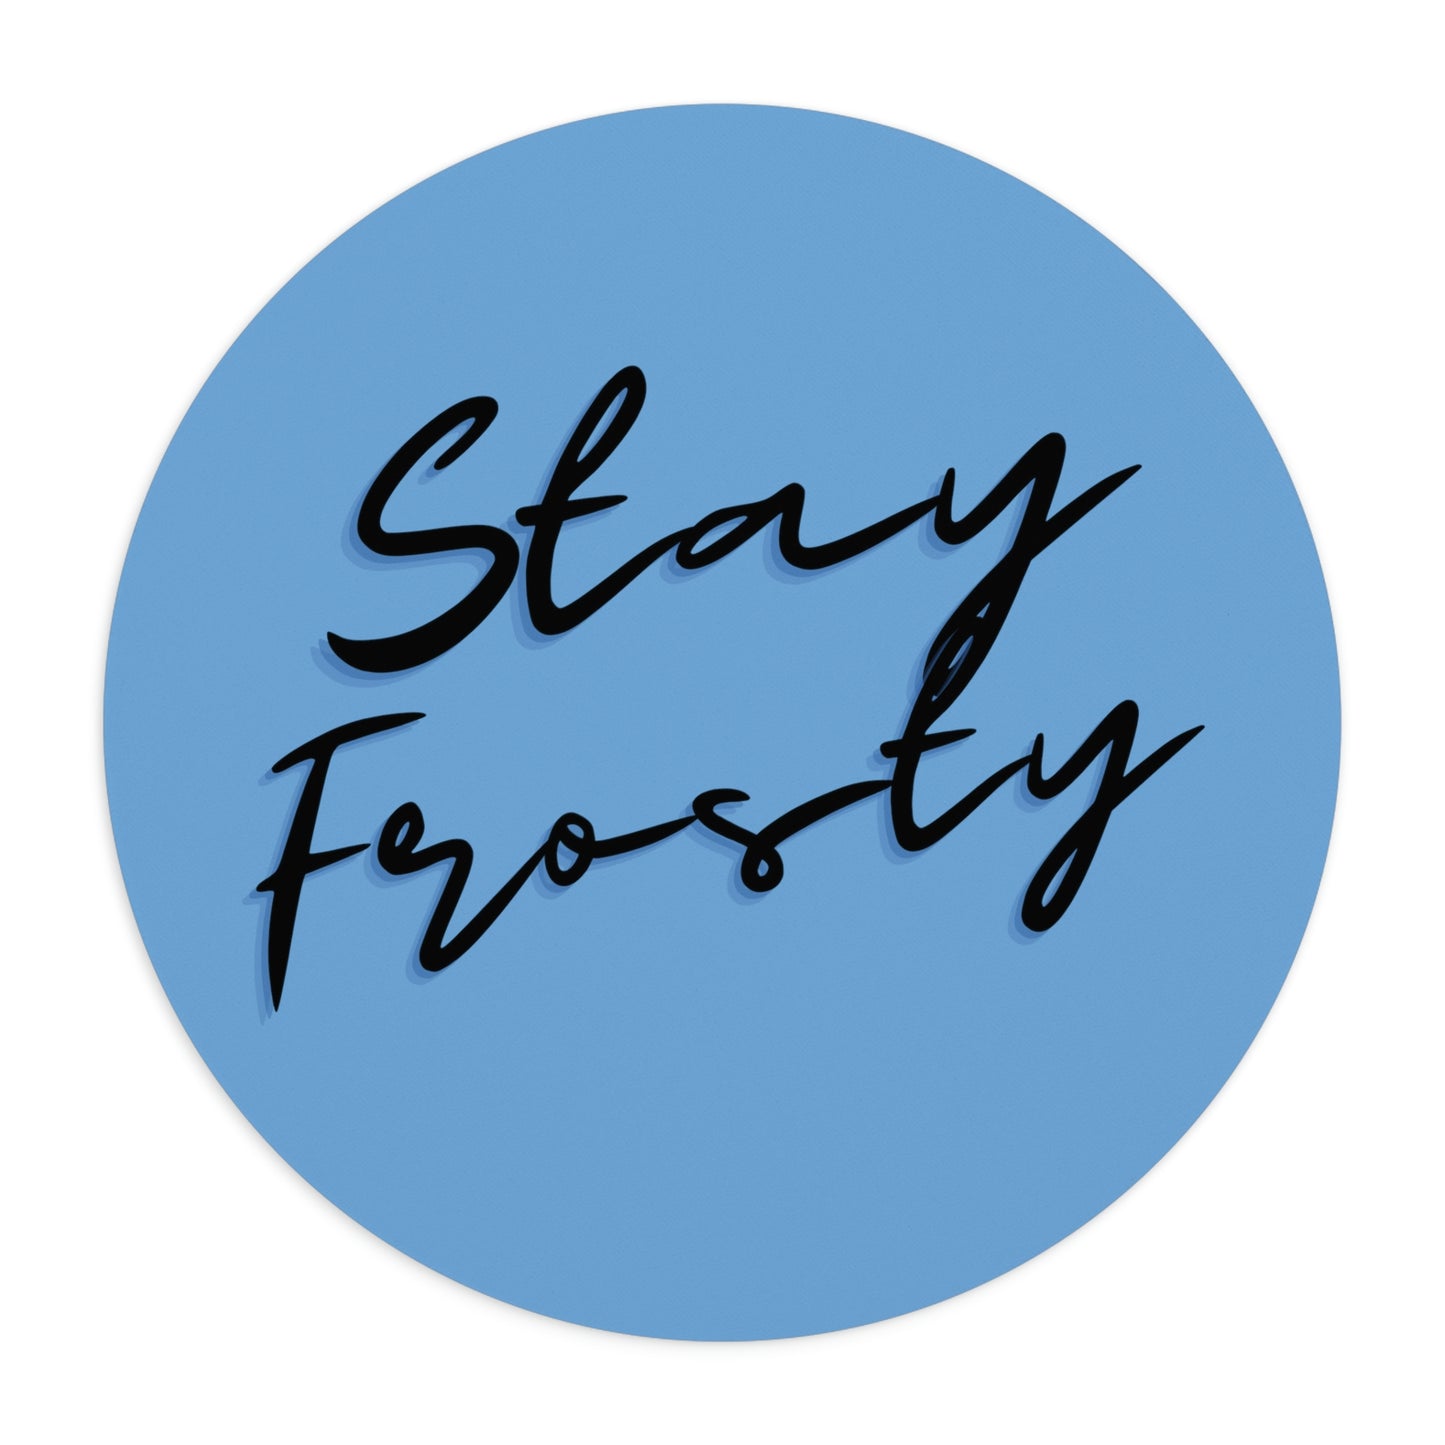 Stay Frosty Blue Mouse Pad featuring the phrase "stay frosty" in stylish black script on a non-slip grip.